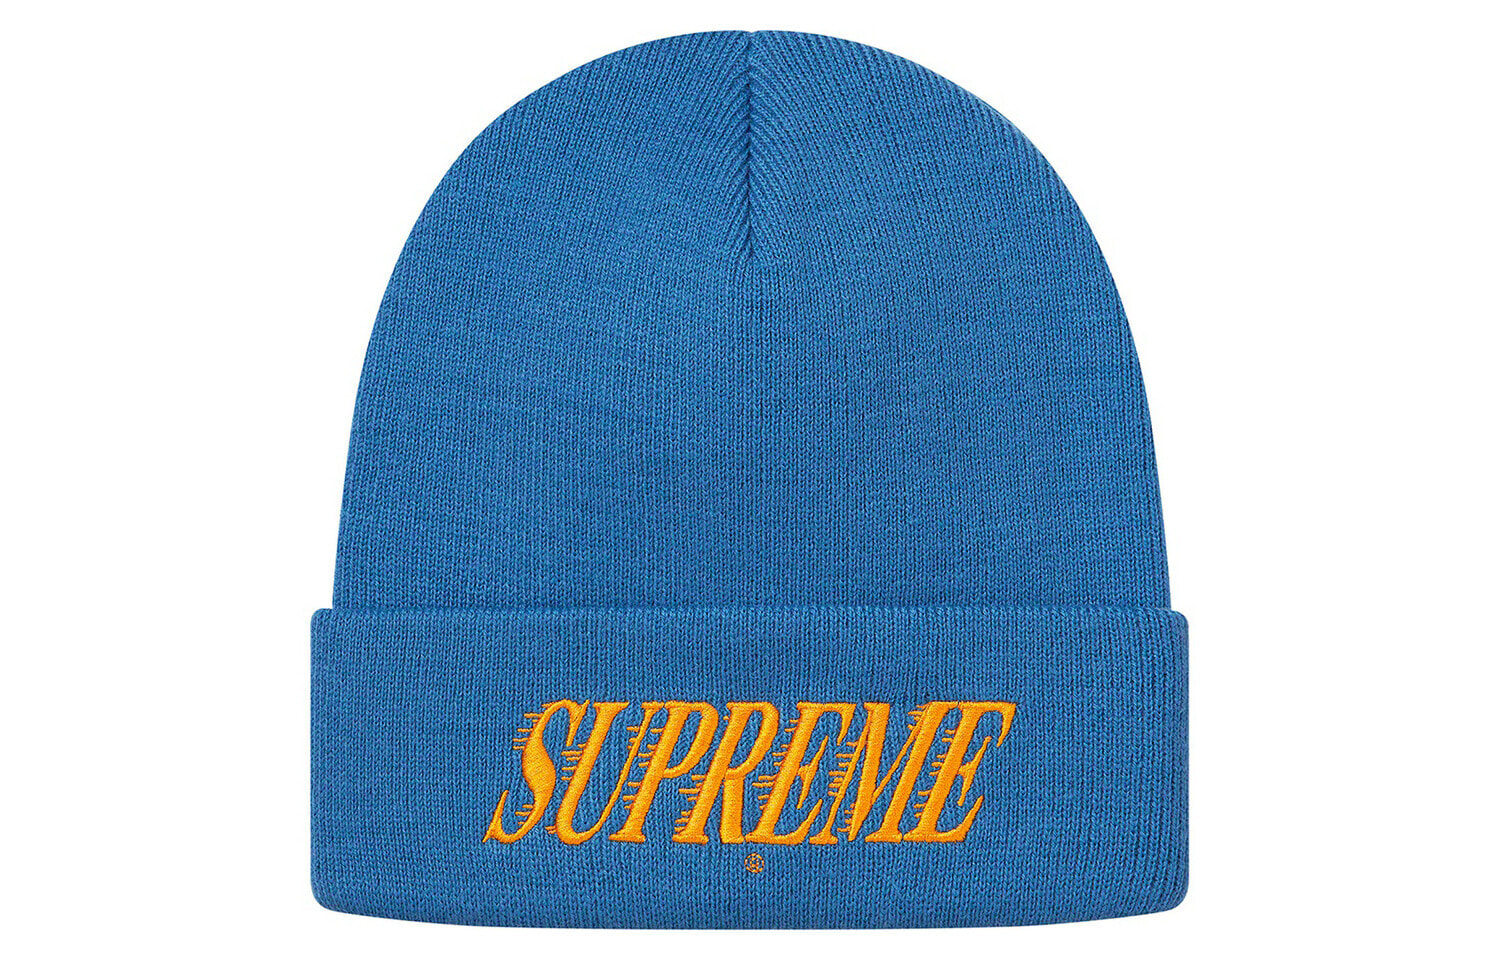 Supreme SS20 Week 17 Crossover Beanie 休闲徽标绒线帽 / Шапка Supreme SS20 Week 17 Crossover Beanie SUP-SS20-732